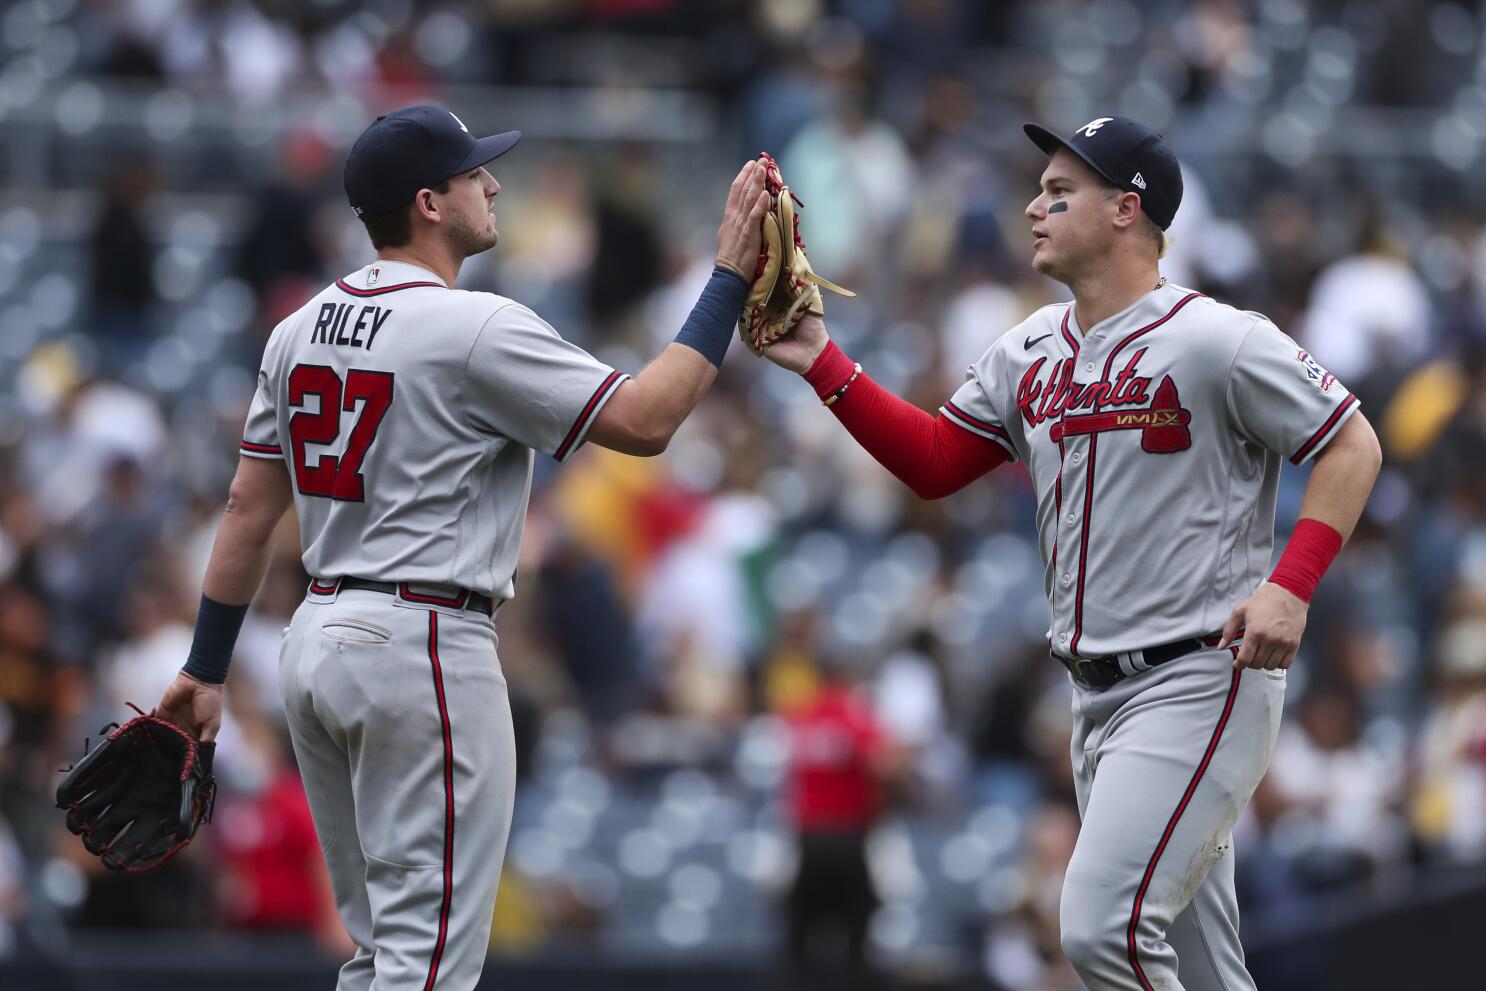 Braves, Phillies to go head to head with division in balance